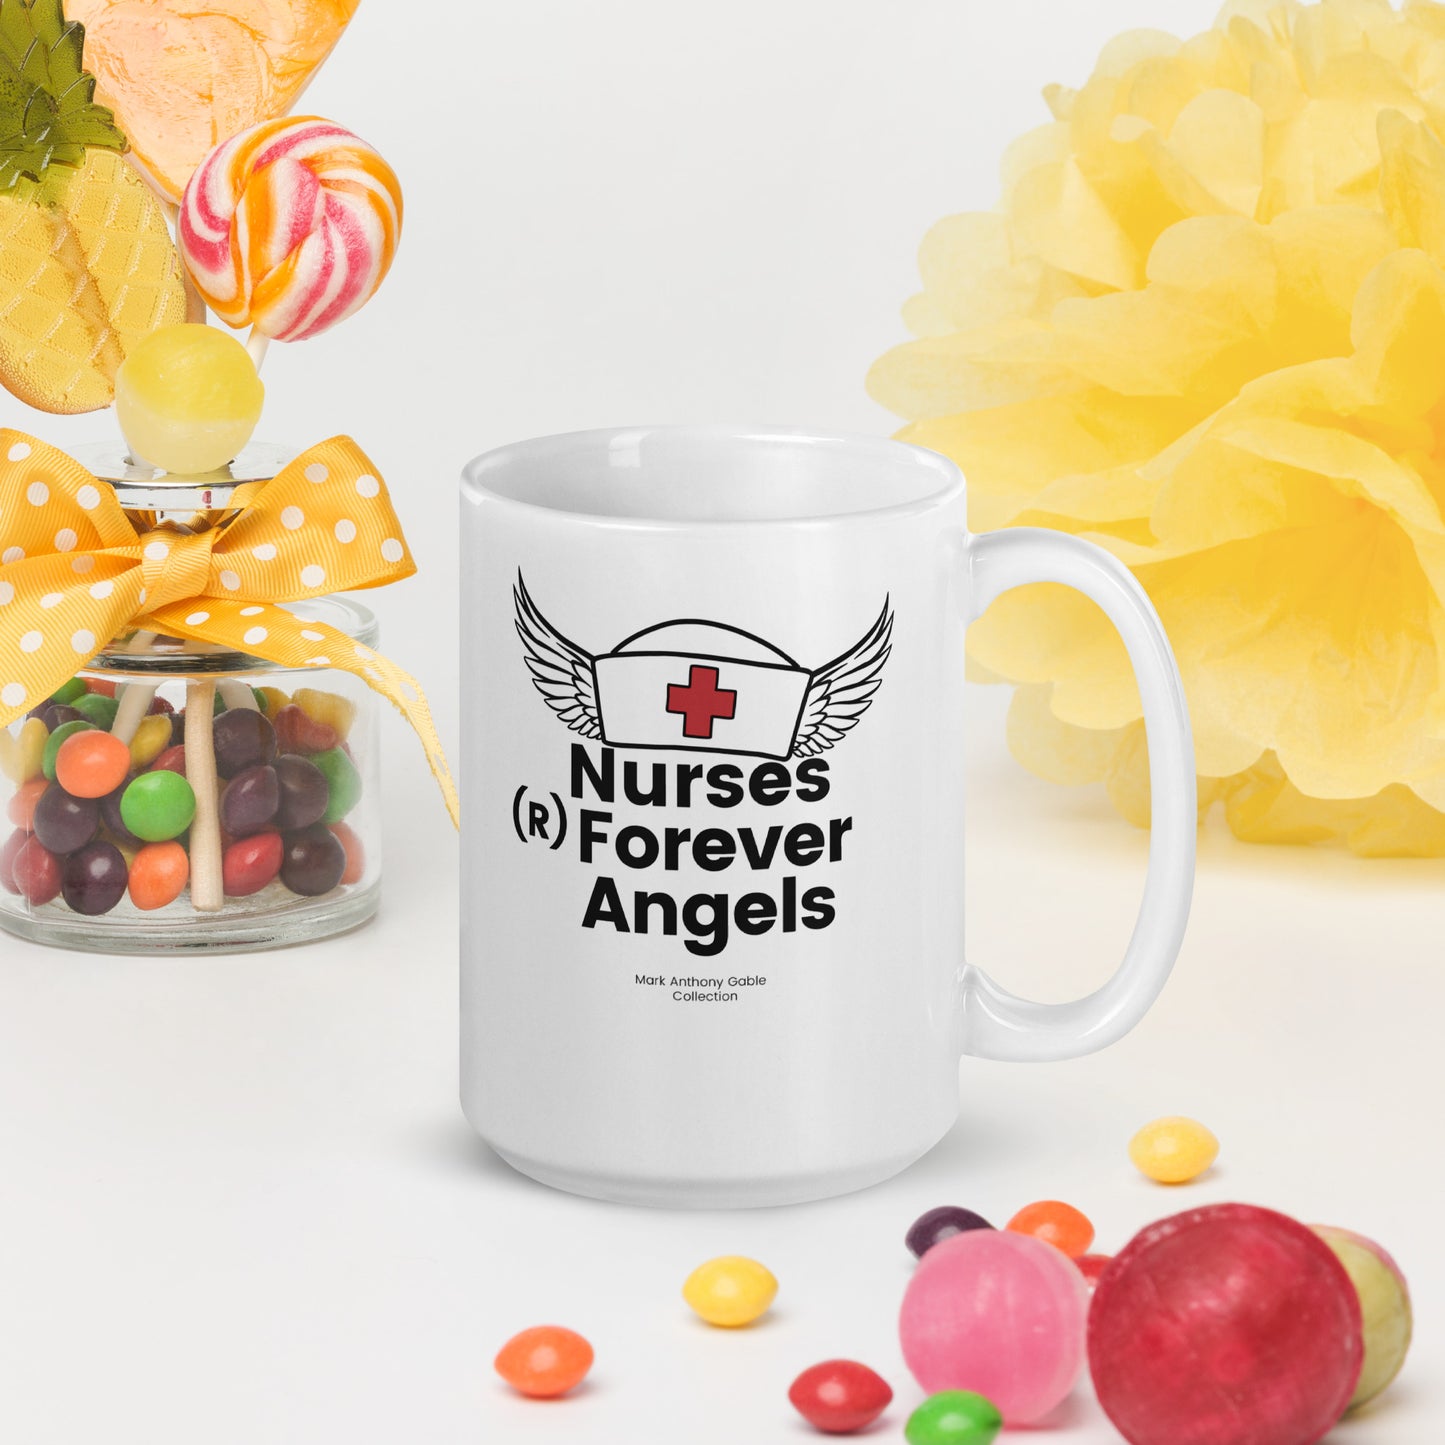 White glossy mug NURSES (R) FOREVER ANGELS by  "Mark Anthony Gable Collection-FOREVER ANGEL"